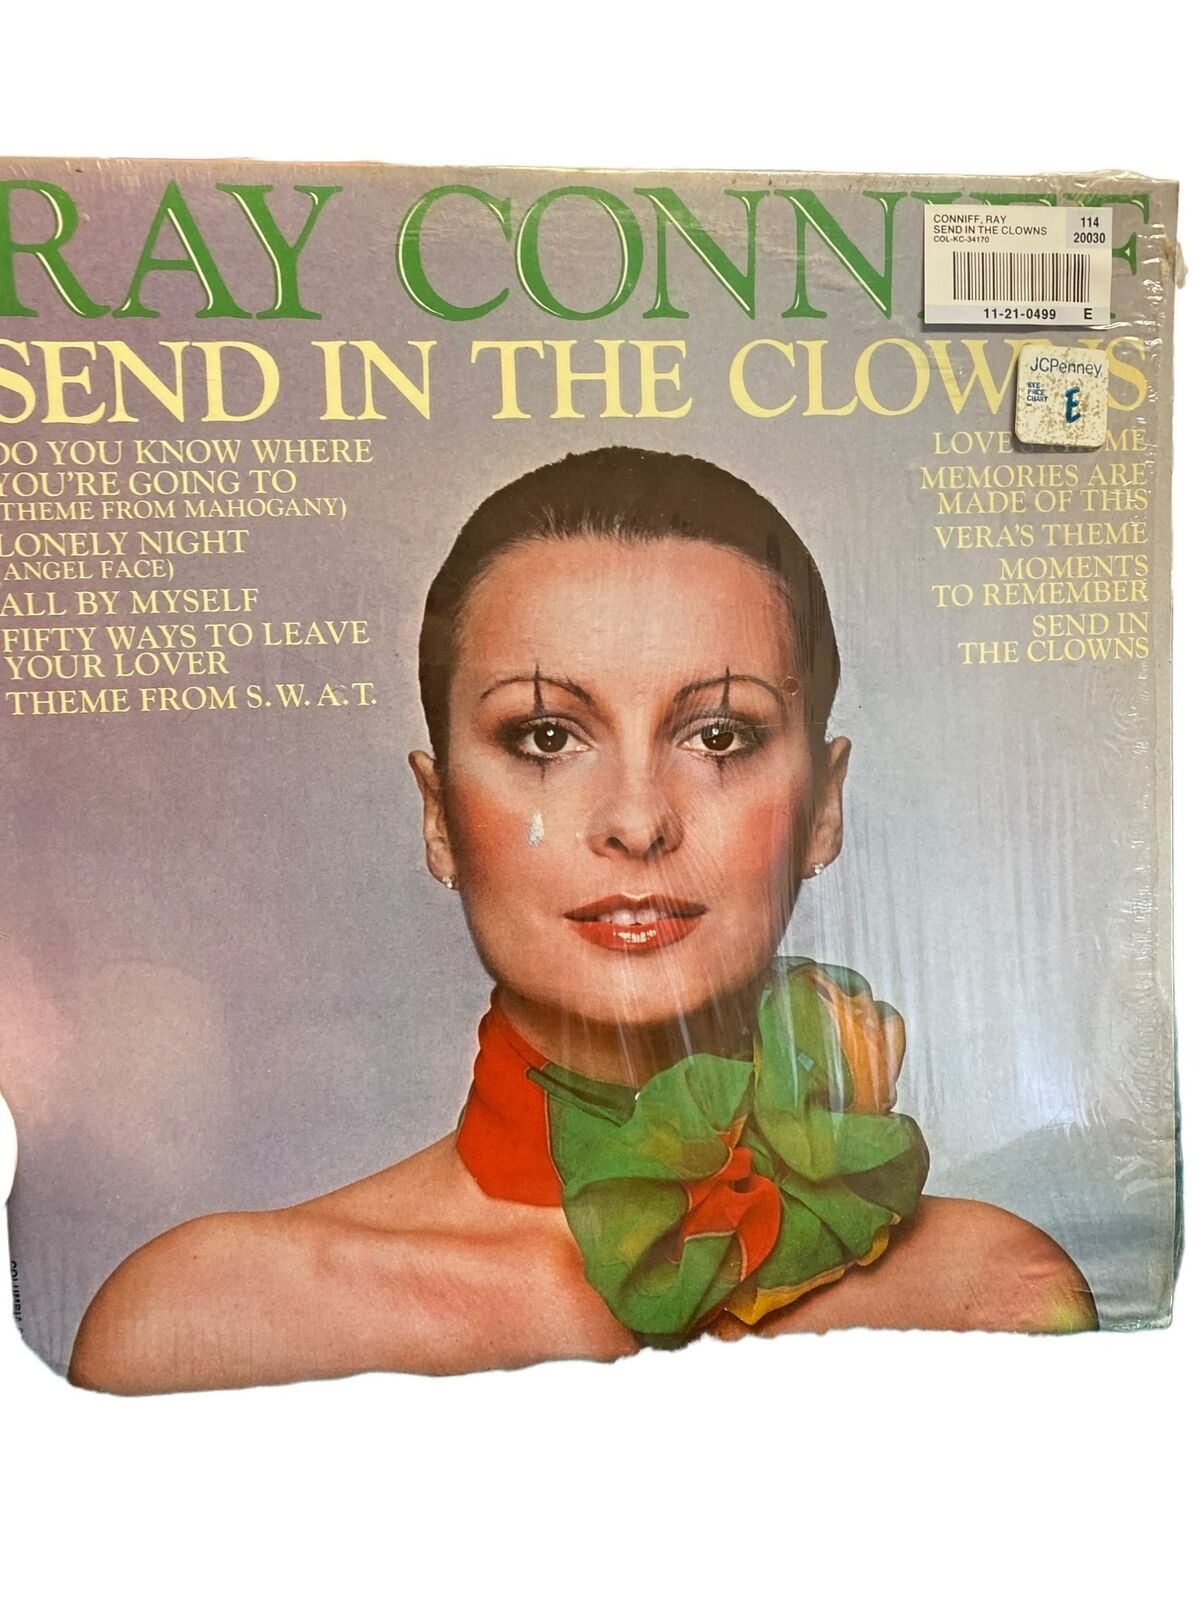 Vintage vinyl record Ray Conniff send in the clowns